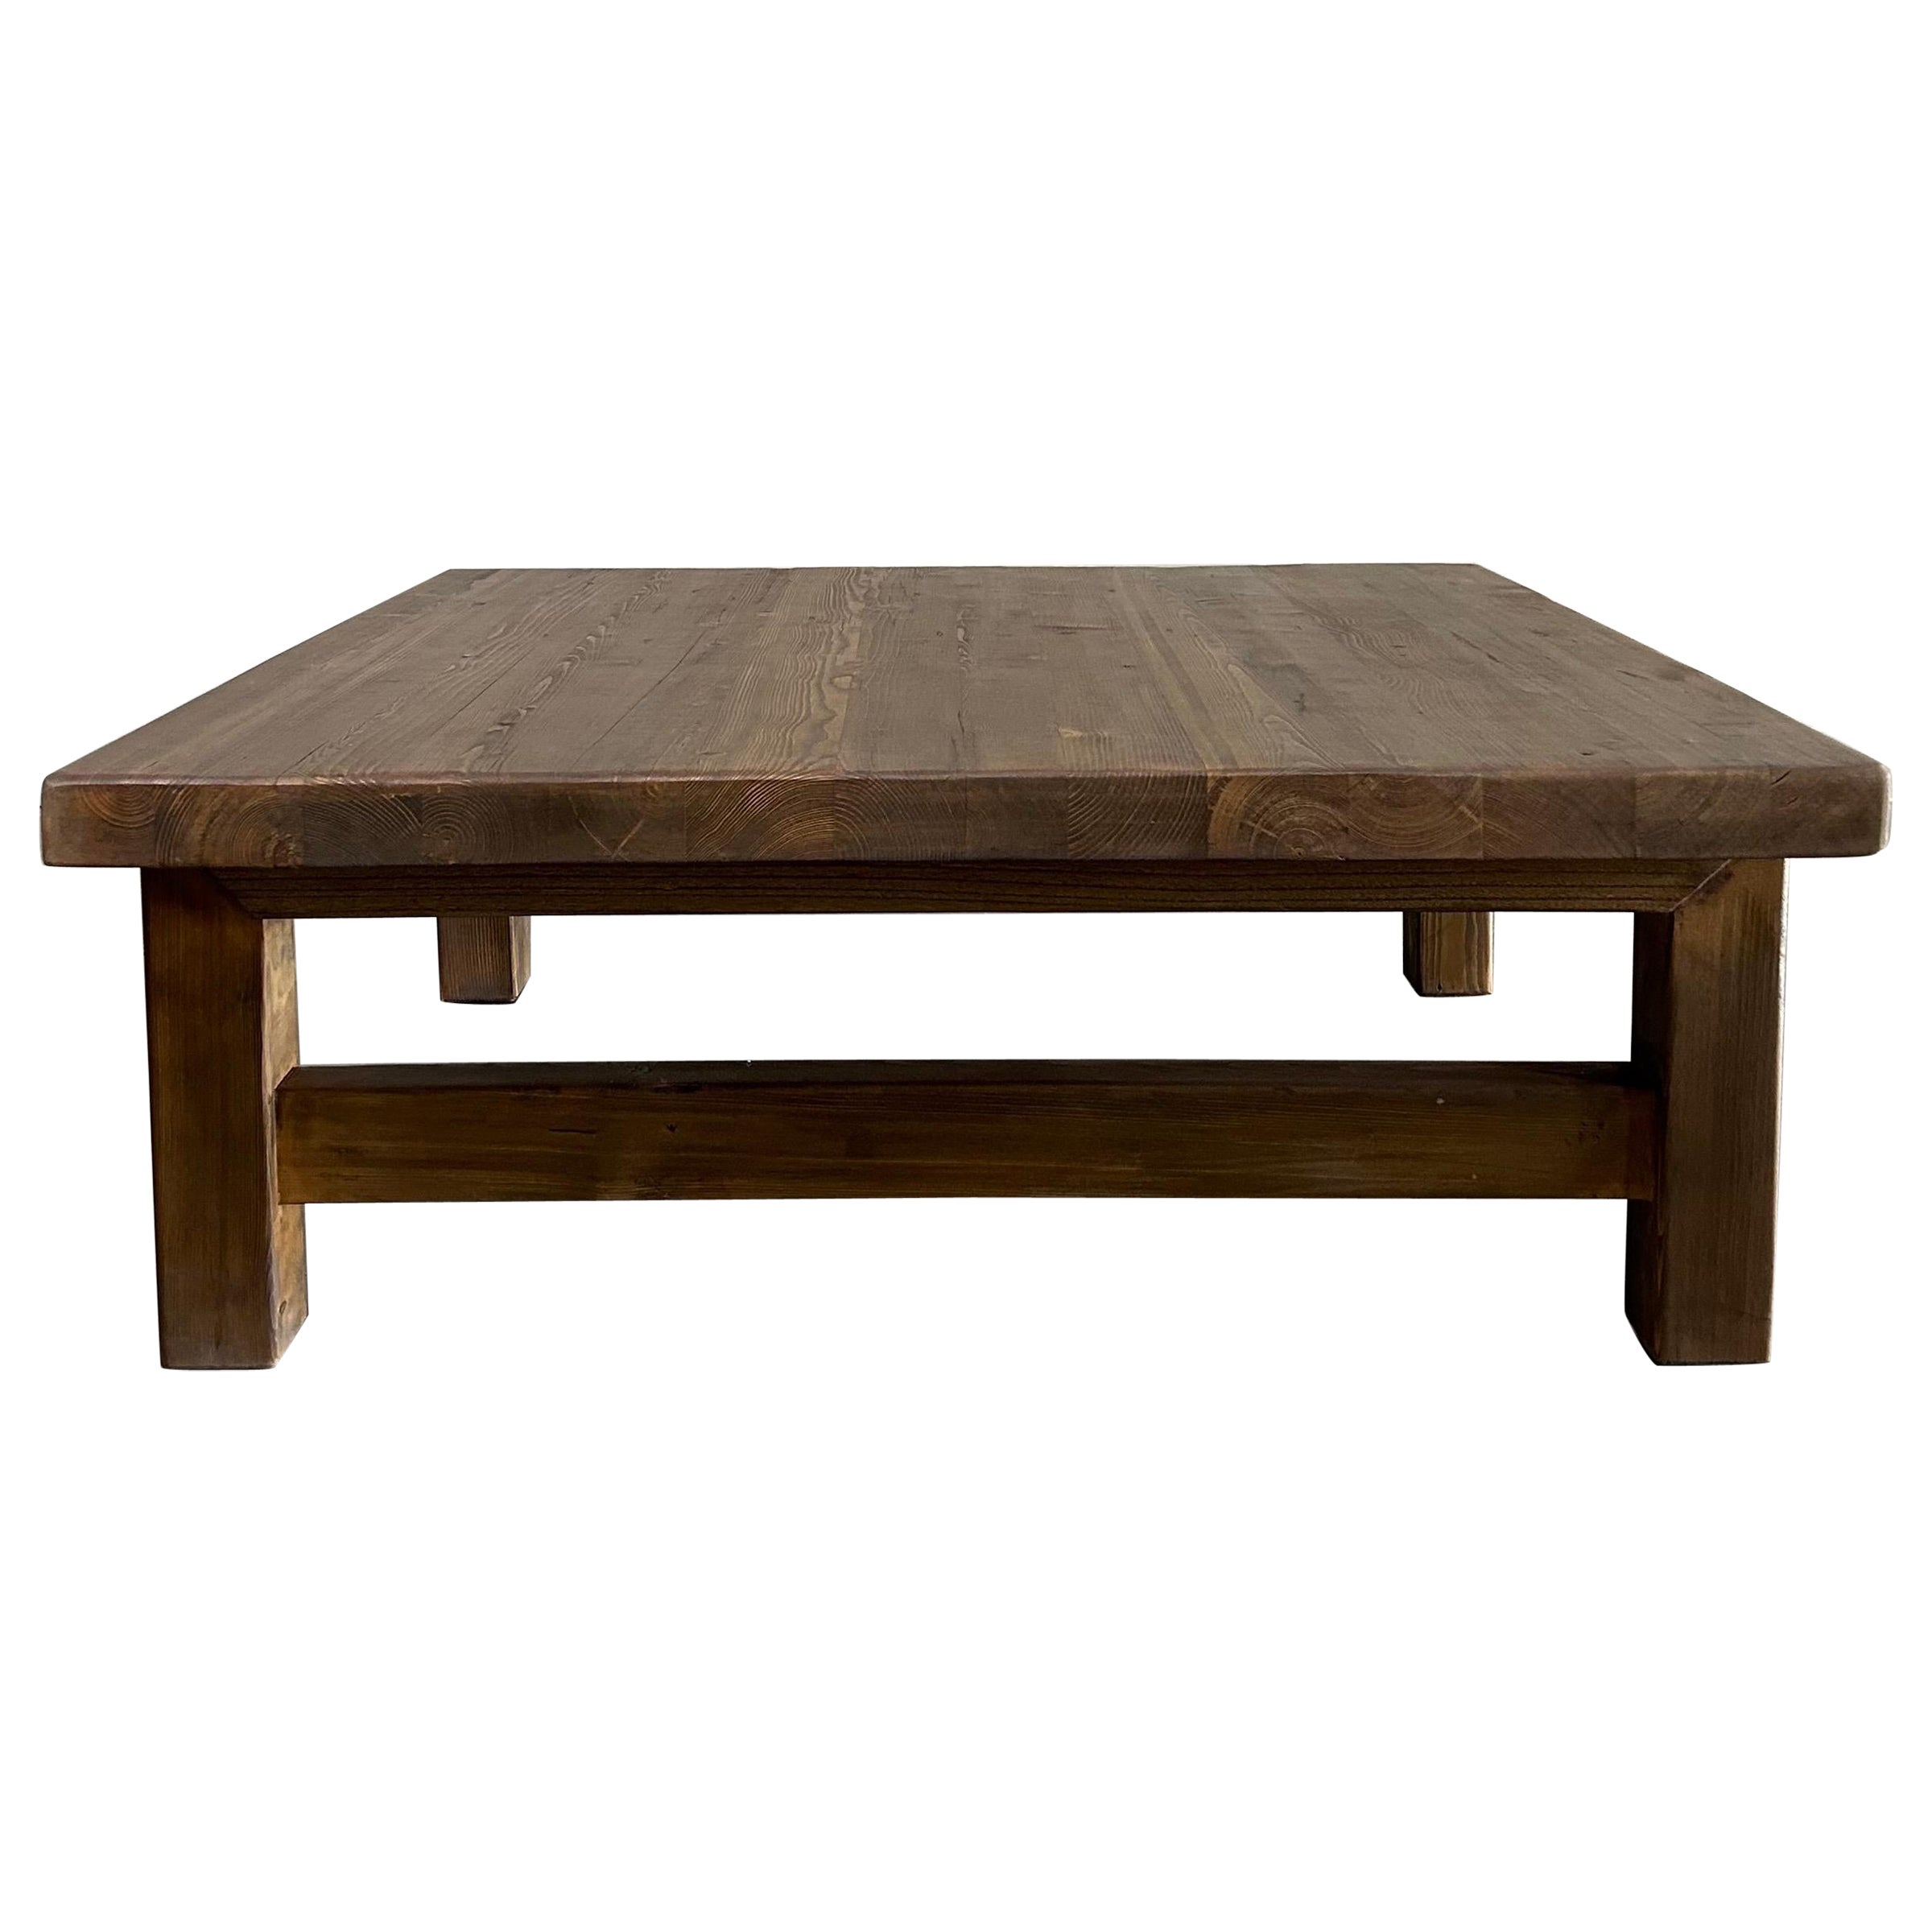 Reclaimed pine wood coffee table For Sale